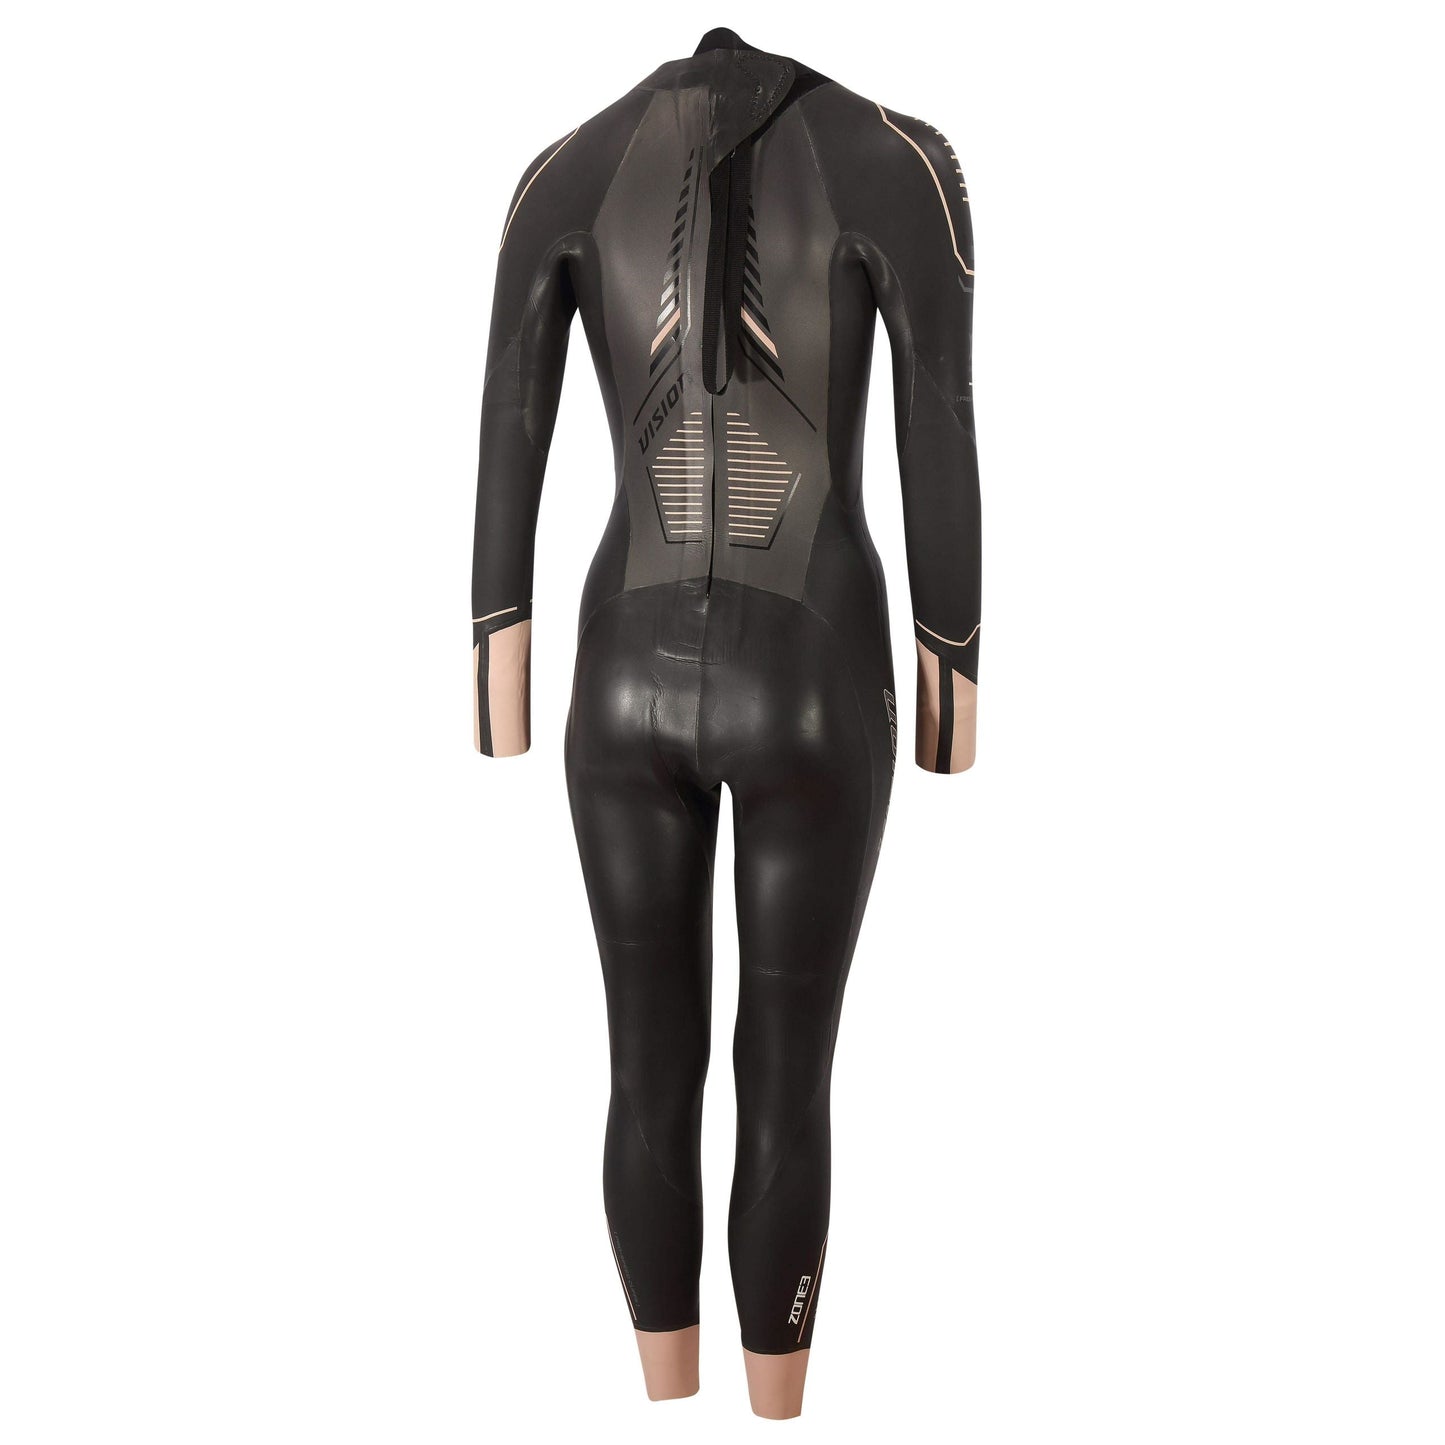 ZONE 3 Women's Vision Wetsuit